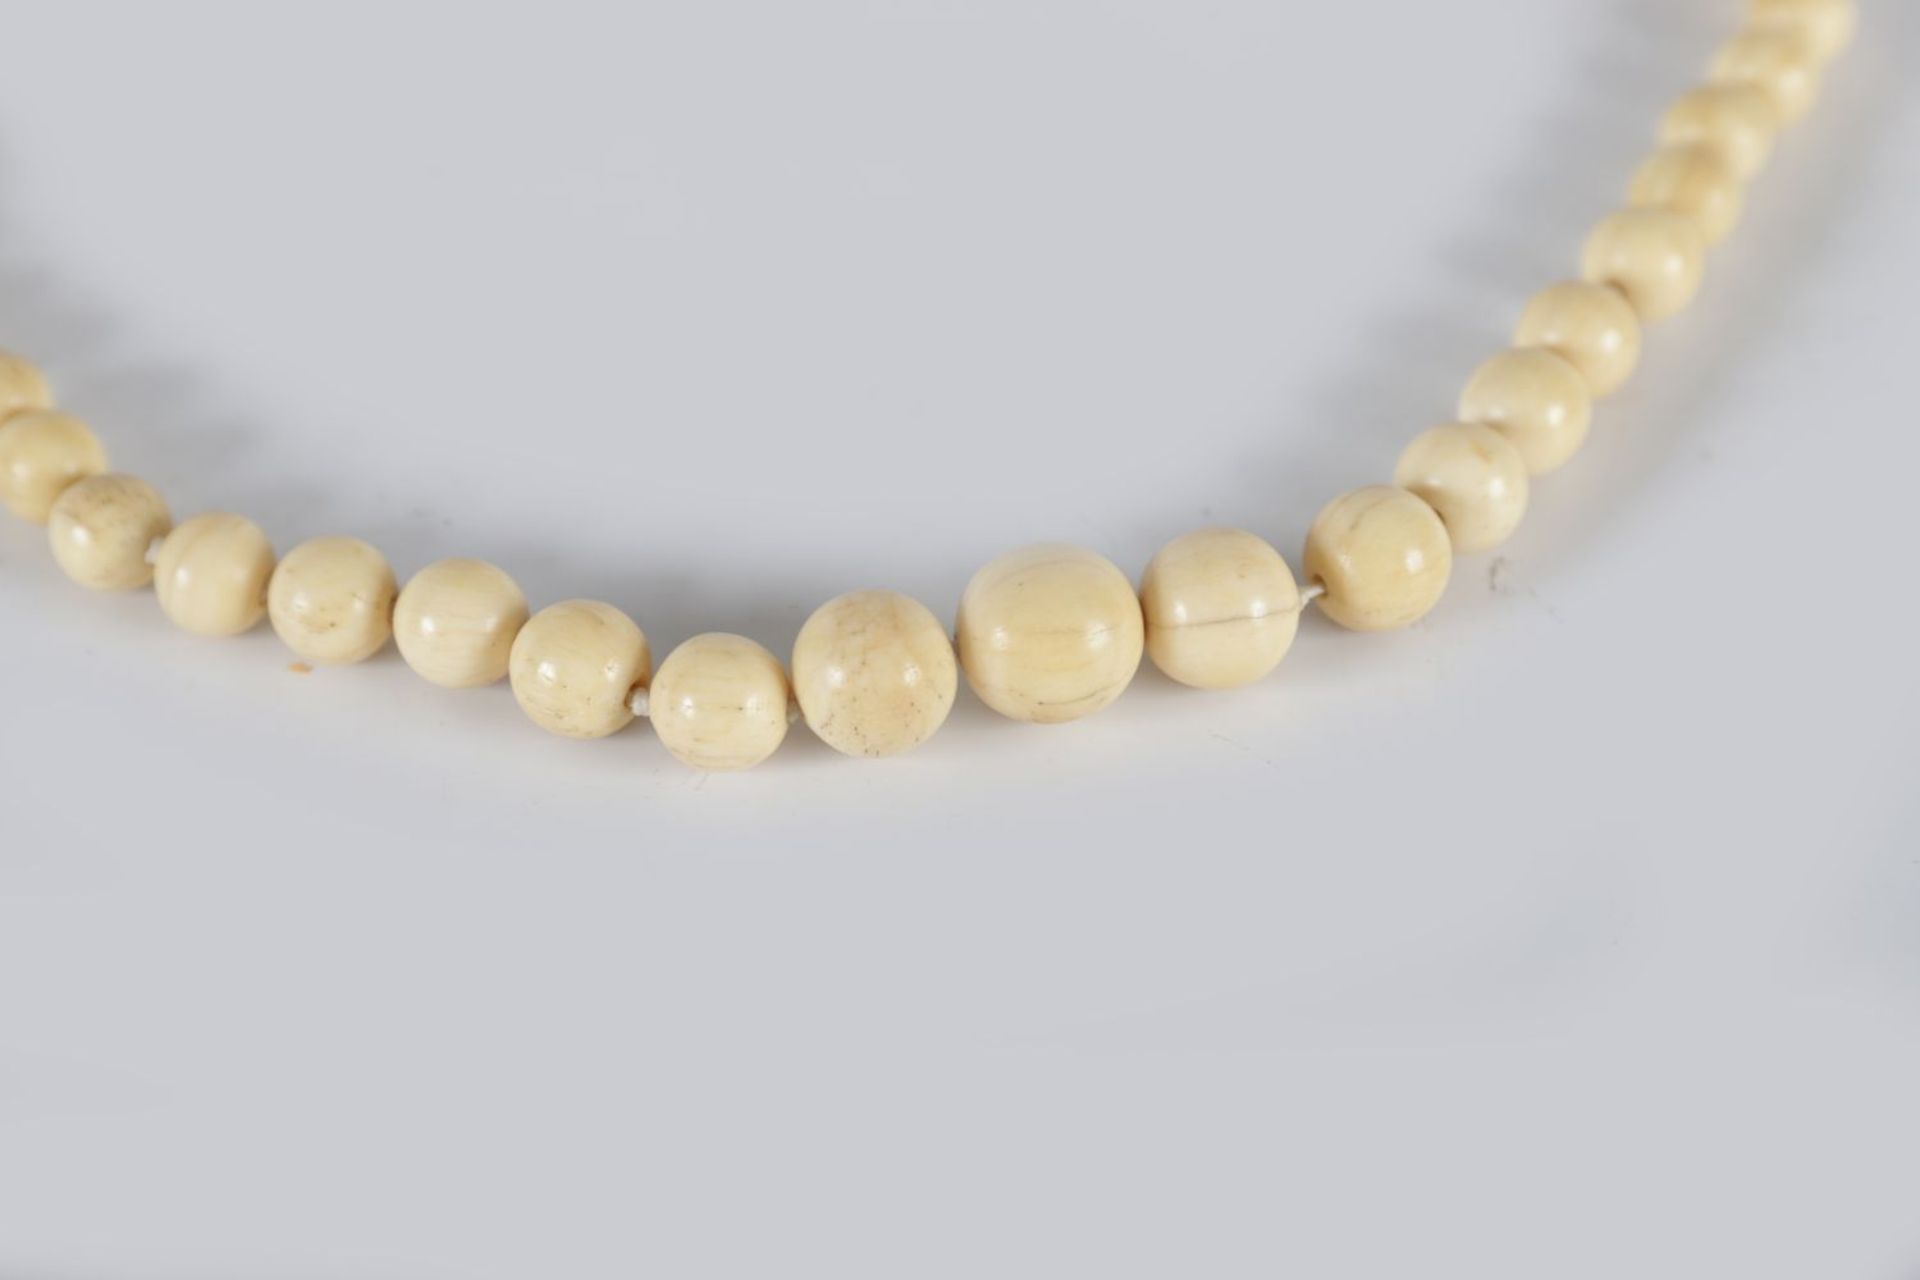 19TH-CENTURY IVORY BEAD NECKLACE - Image 2 of 2